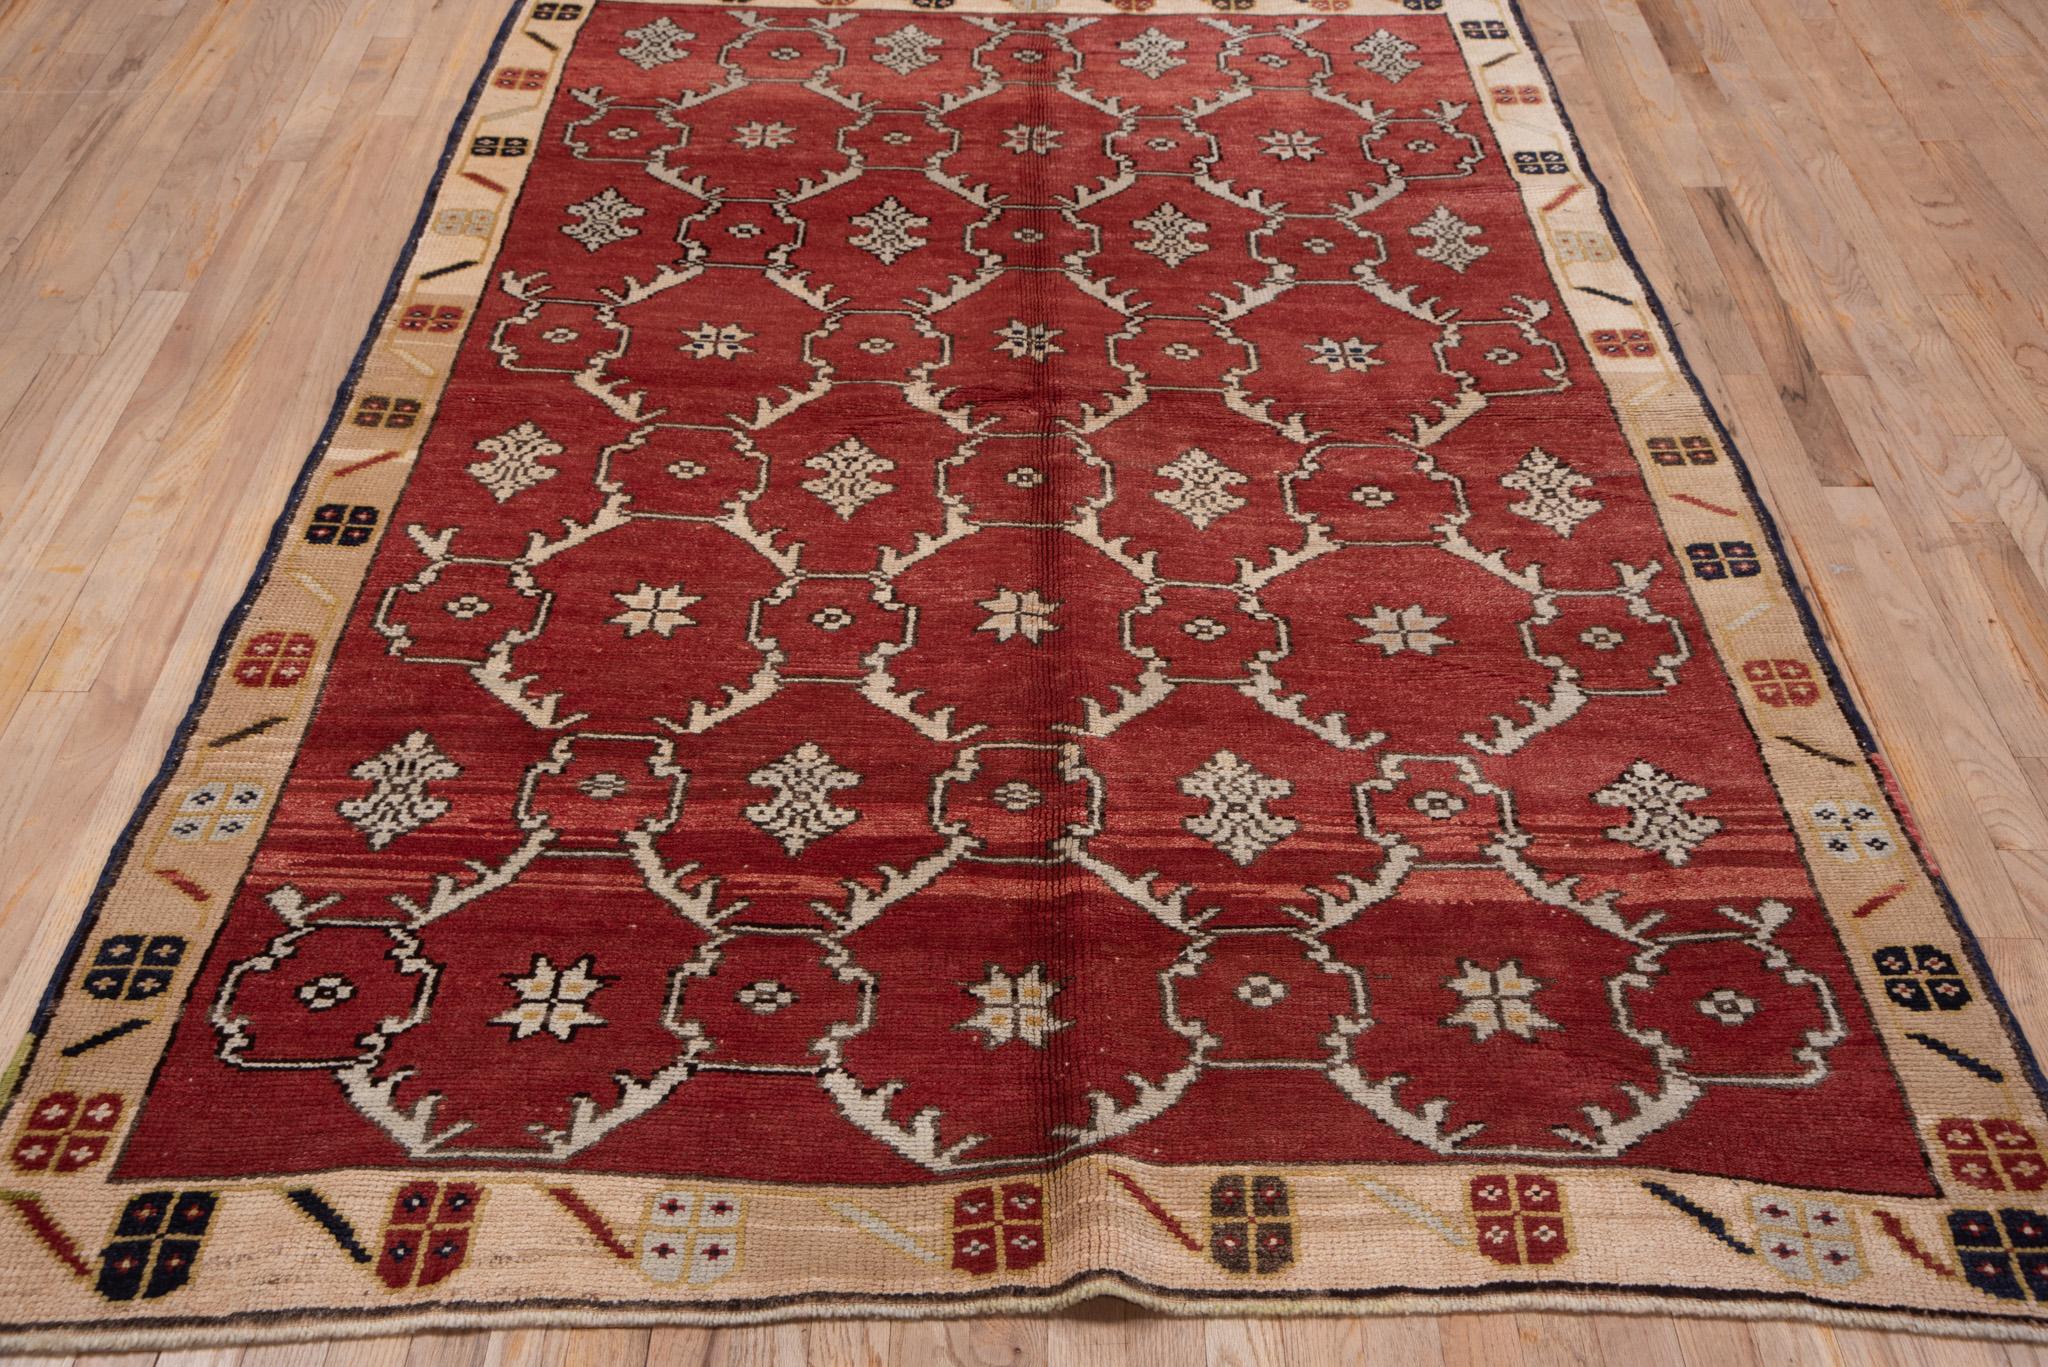 Oushak rugs are a type of traditional handwoven rug that originated in the town of Uşak, located in western Turkey. They are highly regarded for their exceptional quality, unique designs, and historical significance. Oushak rugs have a long history